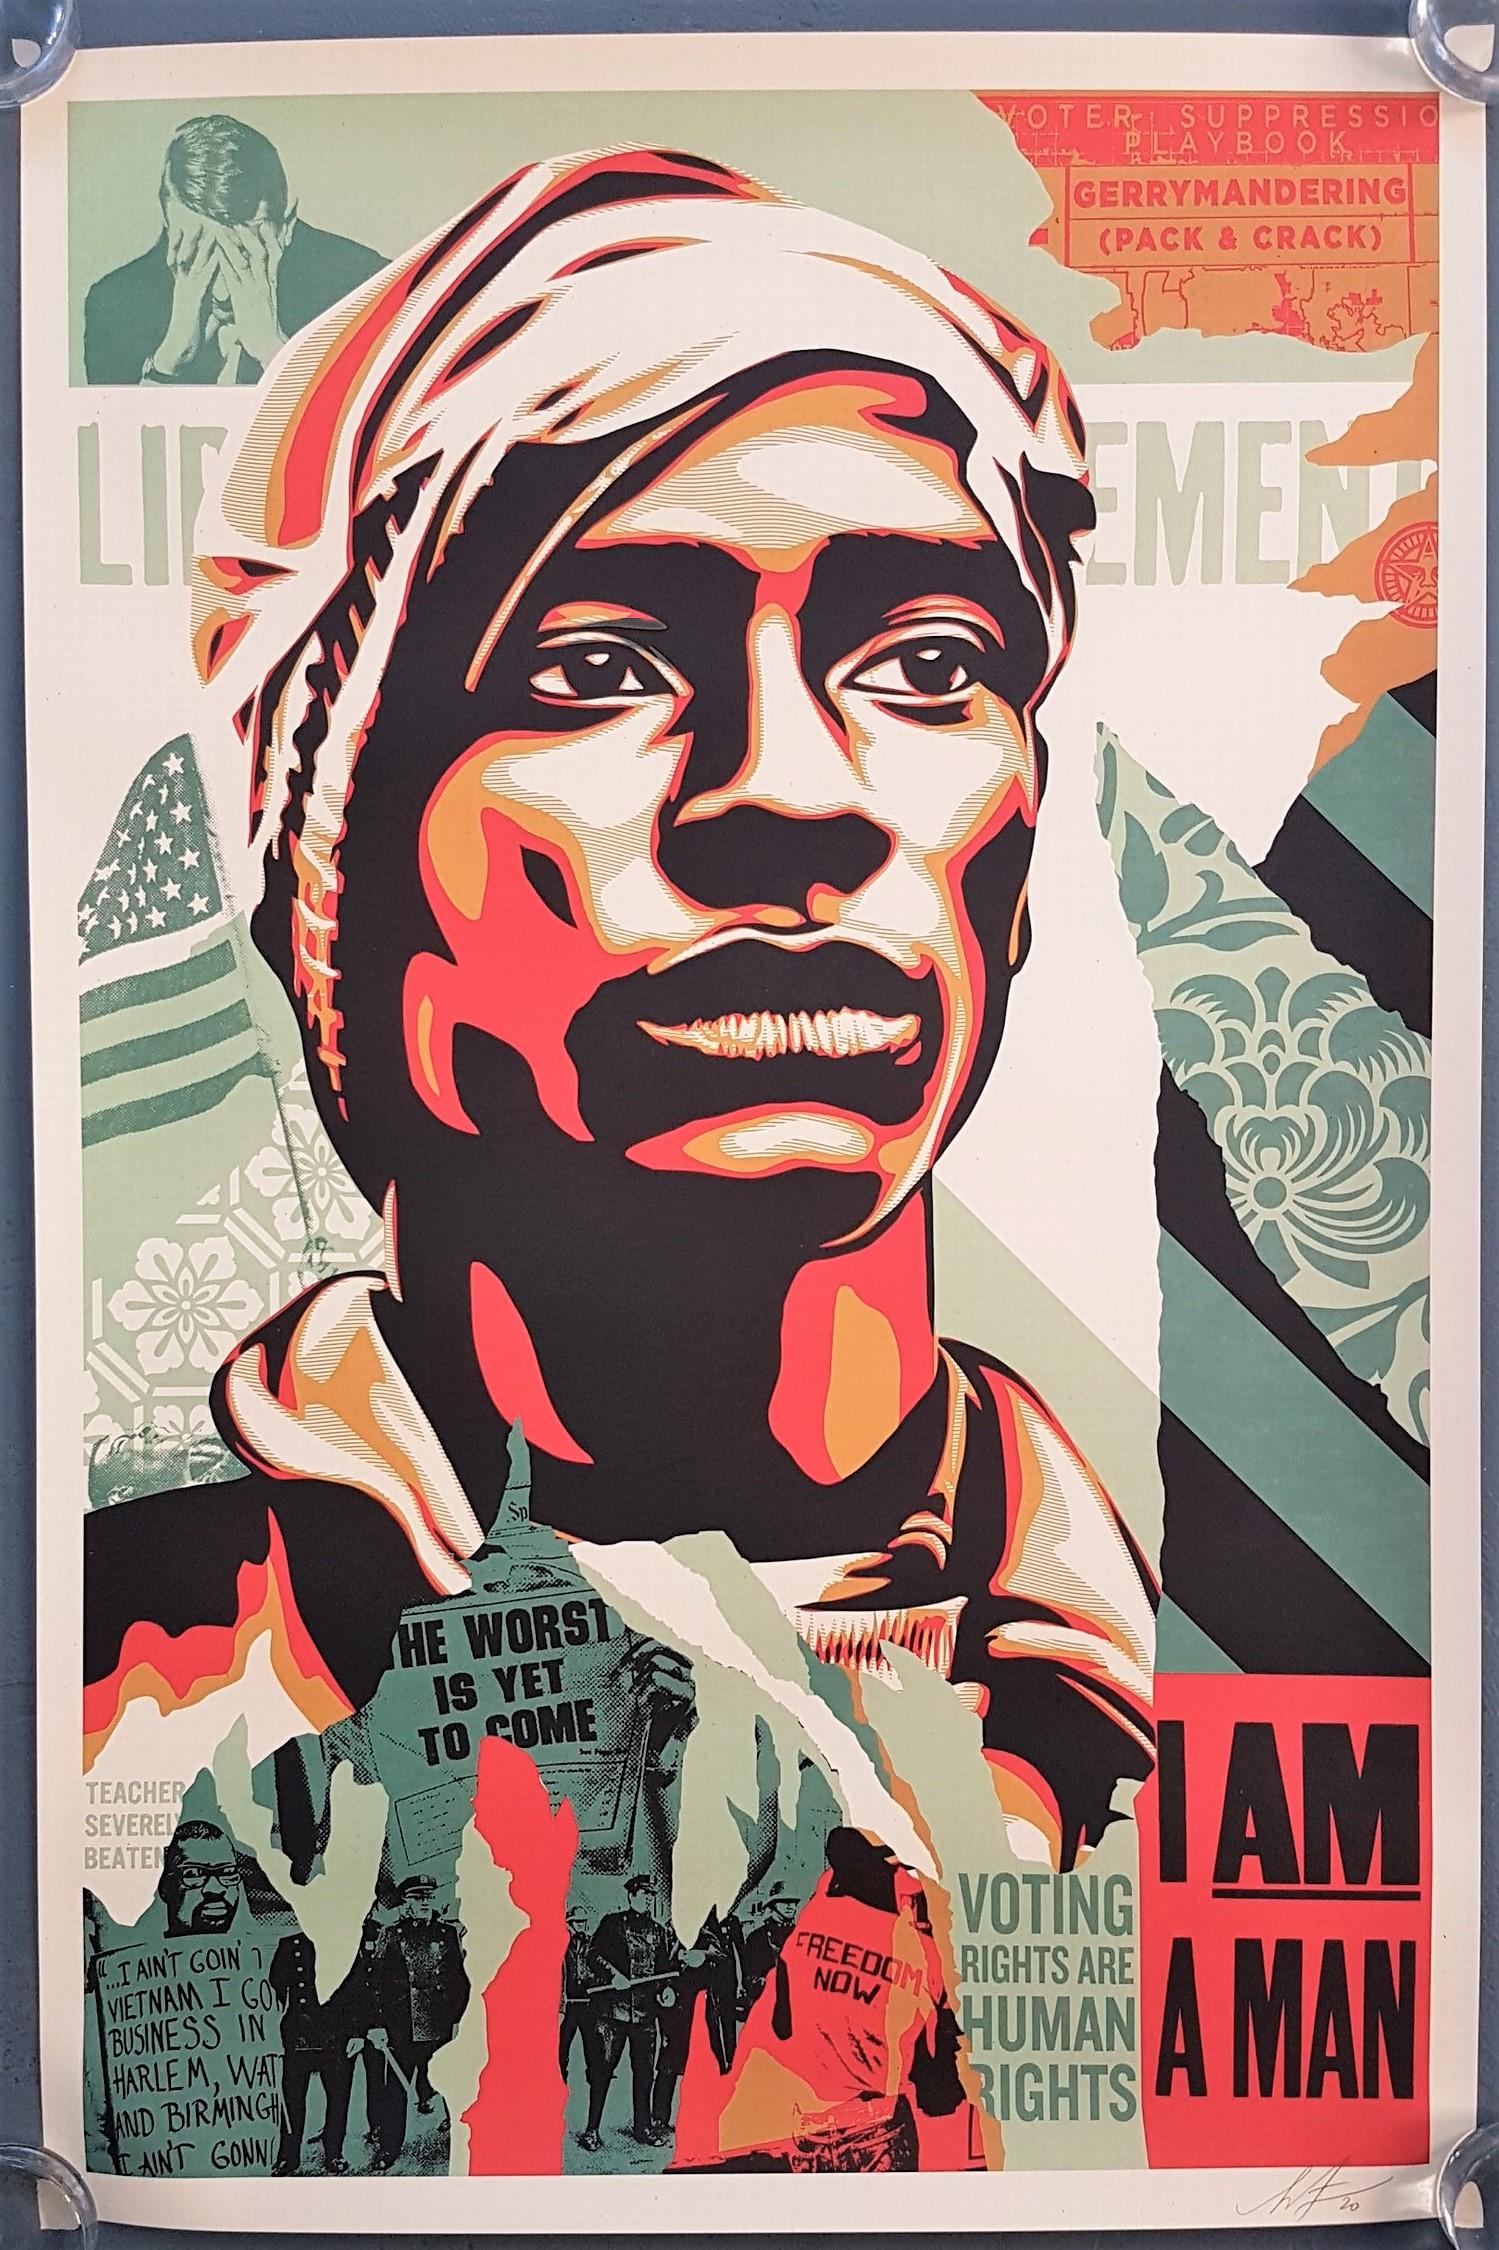 Voting Rights are Human Rights - Print by Shepard Fairey